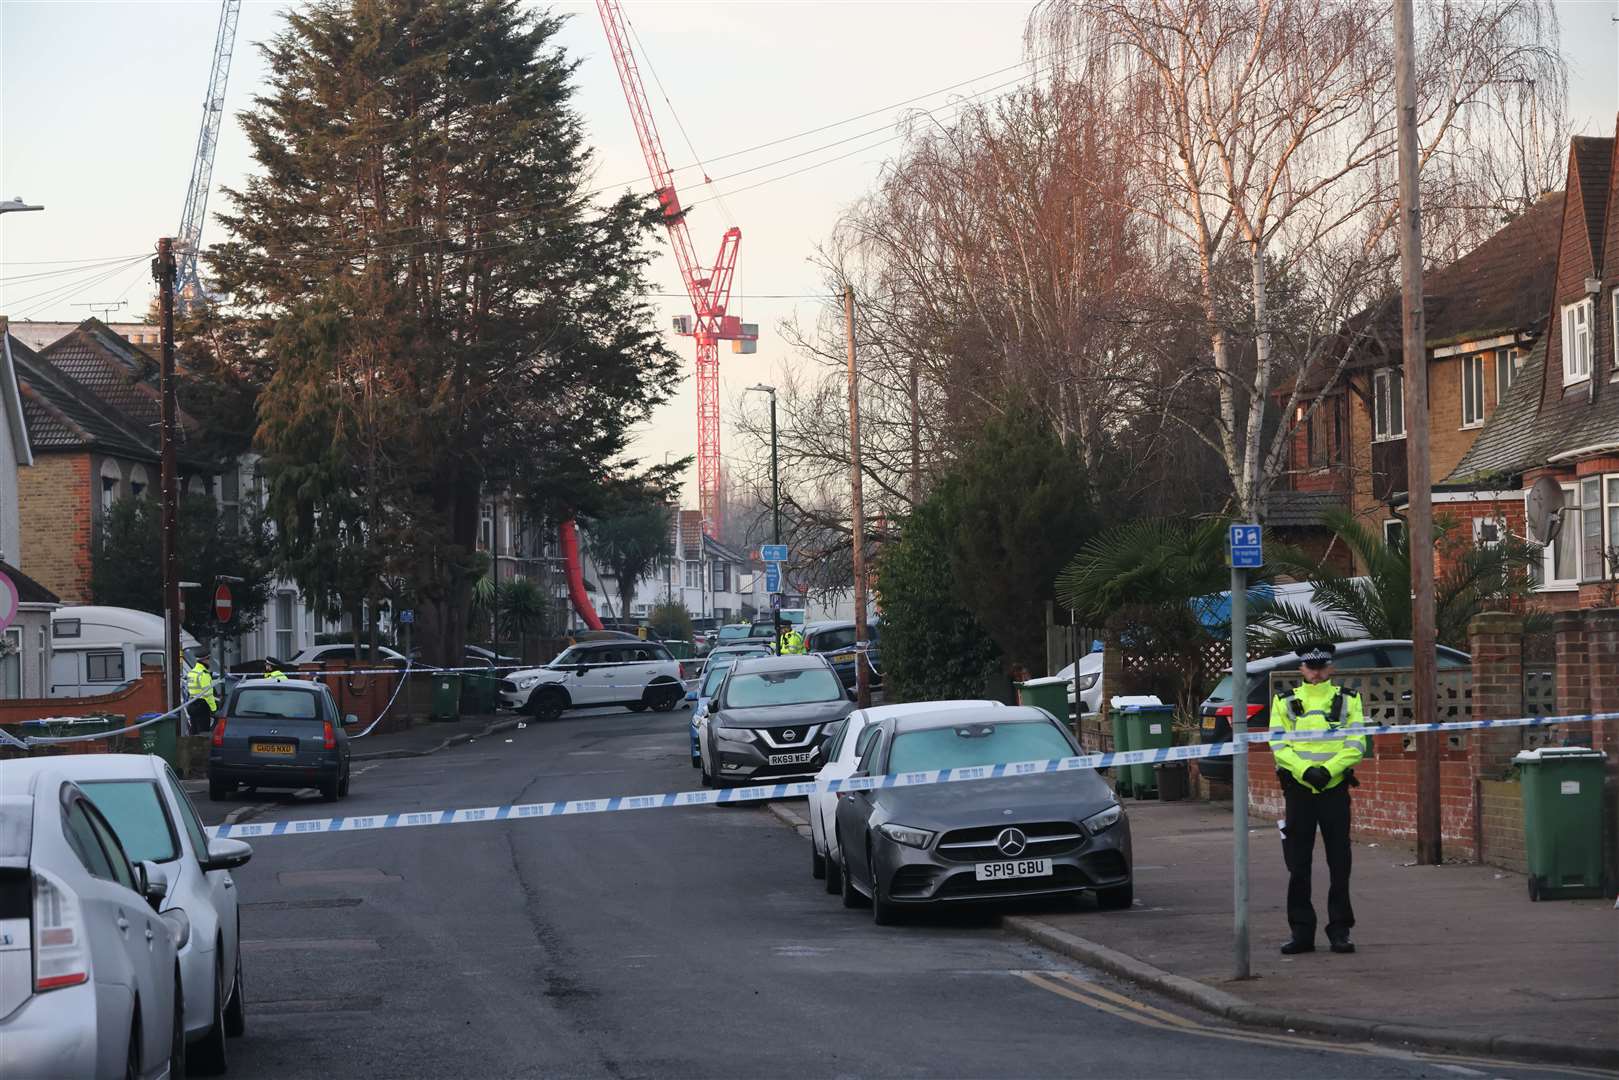 Police were called to Pembroke Road on February 9 to reports of shots being fired. Picture: UKNIP